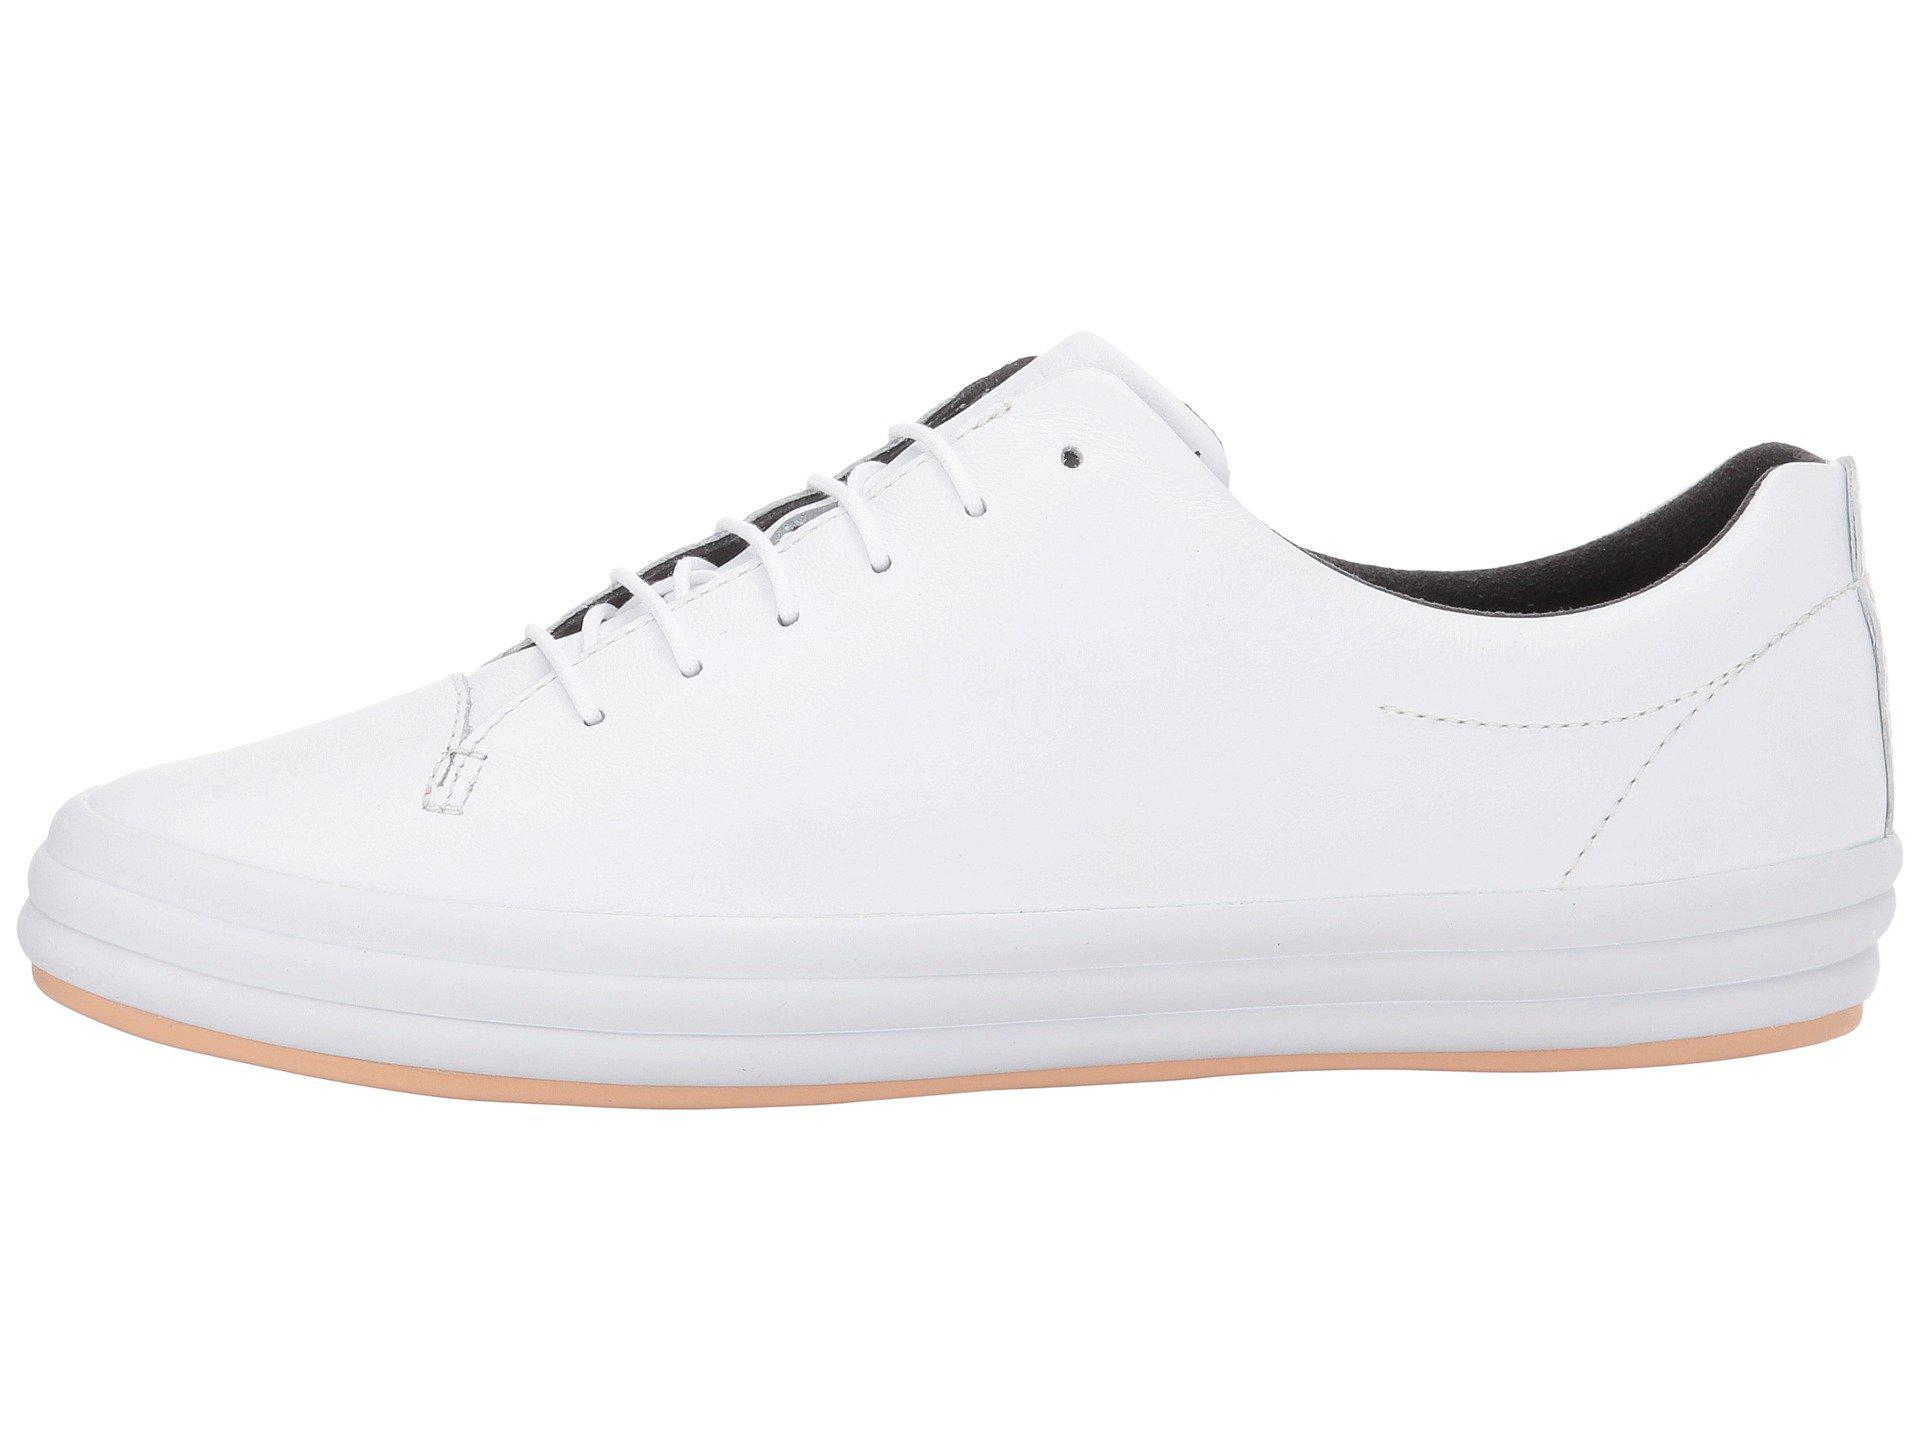 Camper Hoops - K200298 (white) Women's Lace Up Casual Shoes in White - Lyst